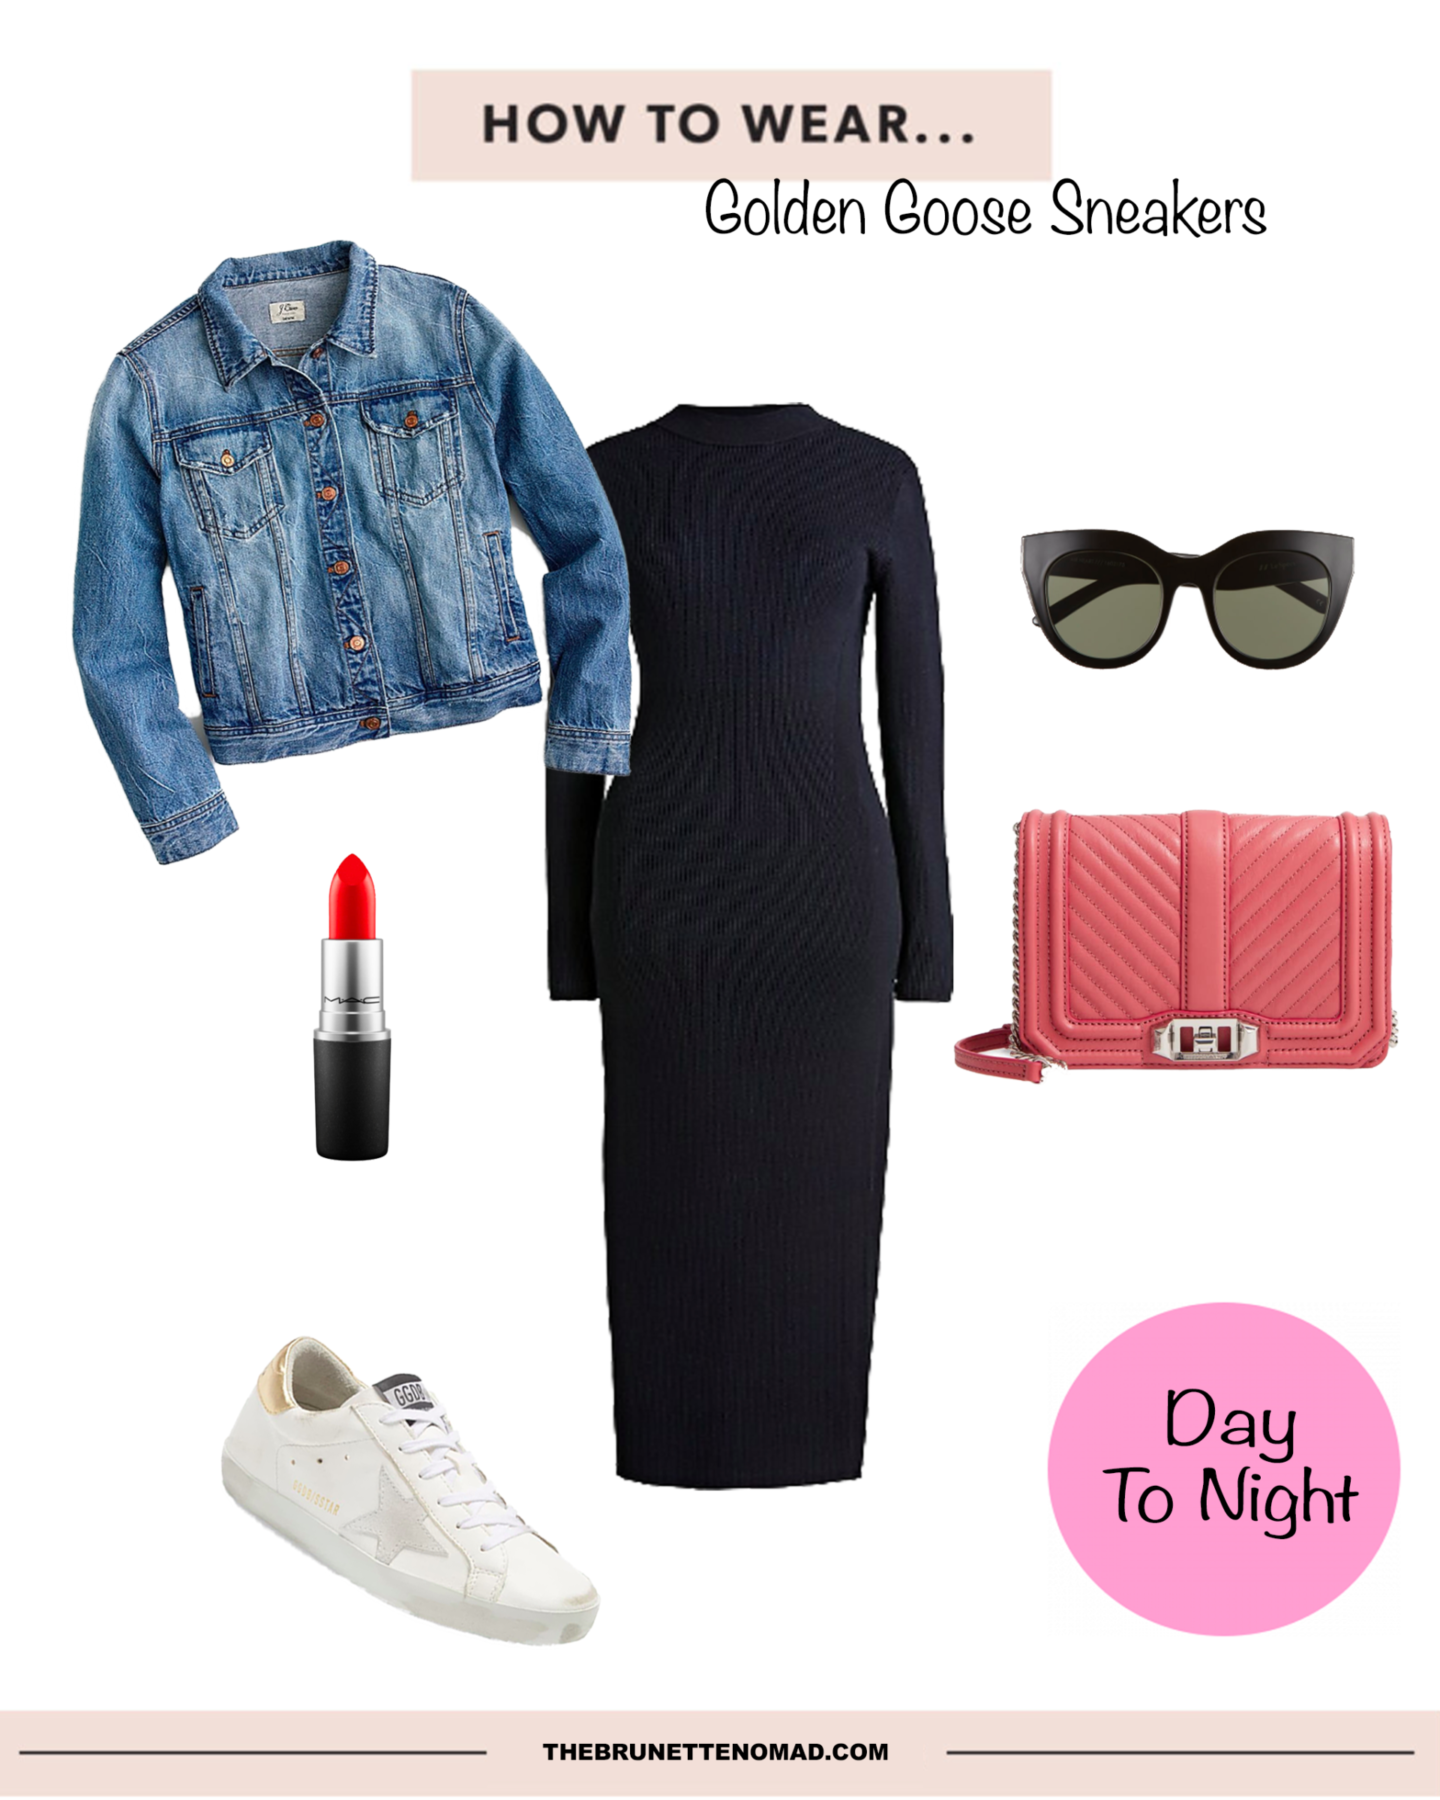 How to Style Golden Goose Sneakers 3 Ways - The Nomad